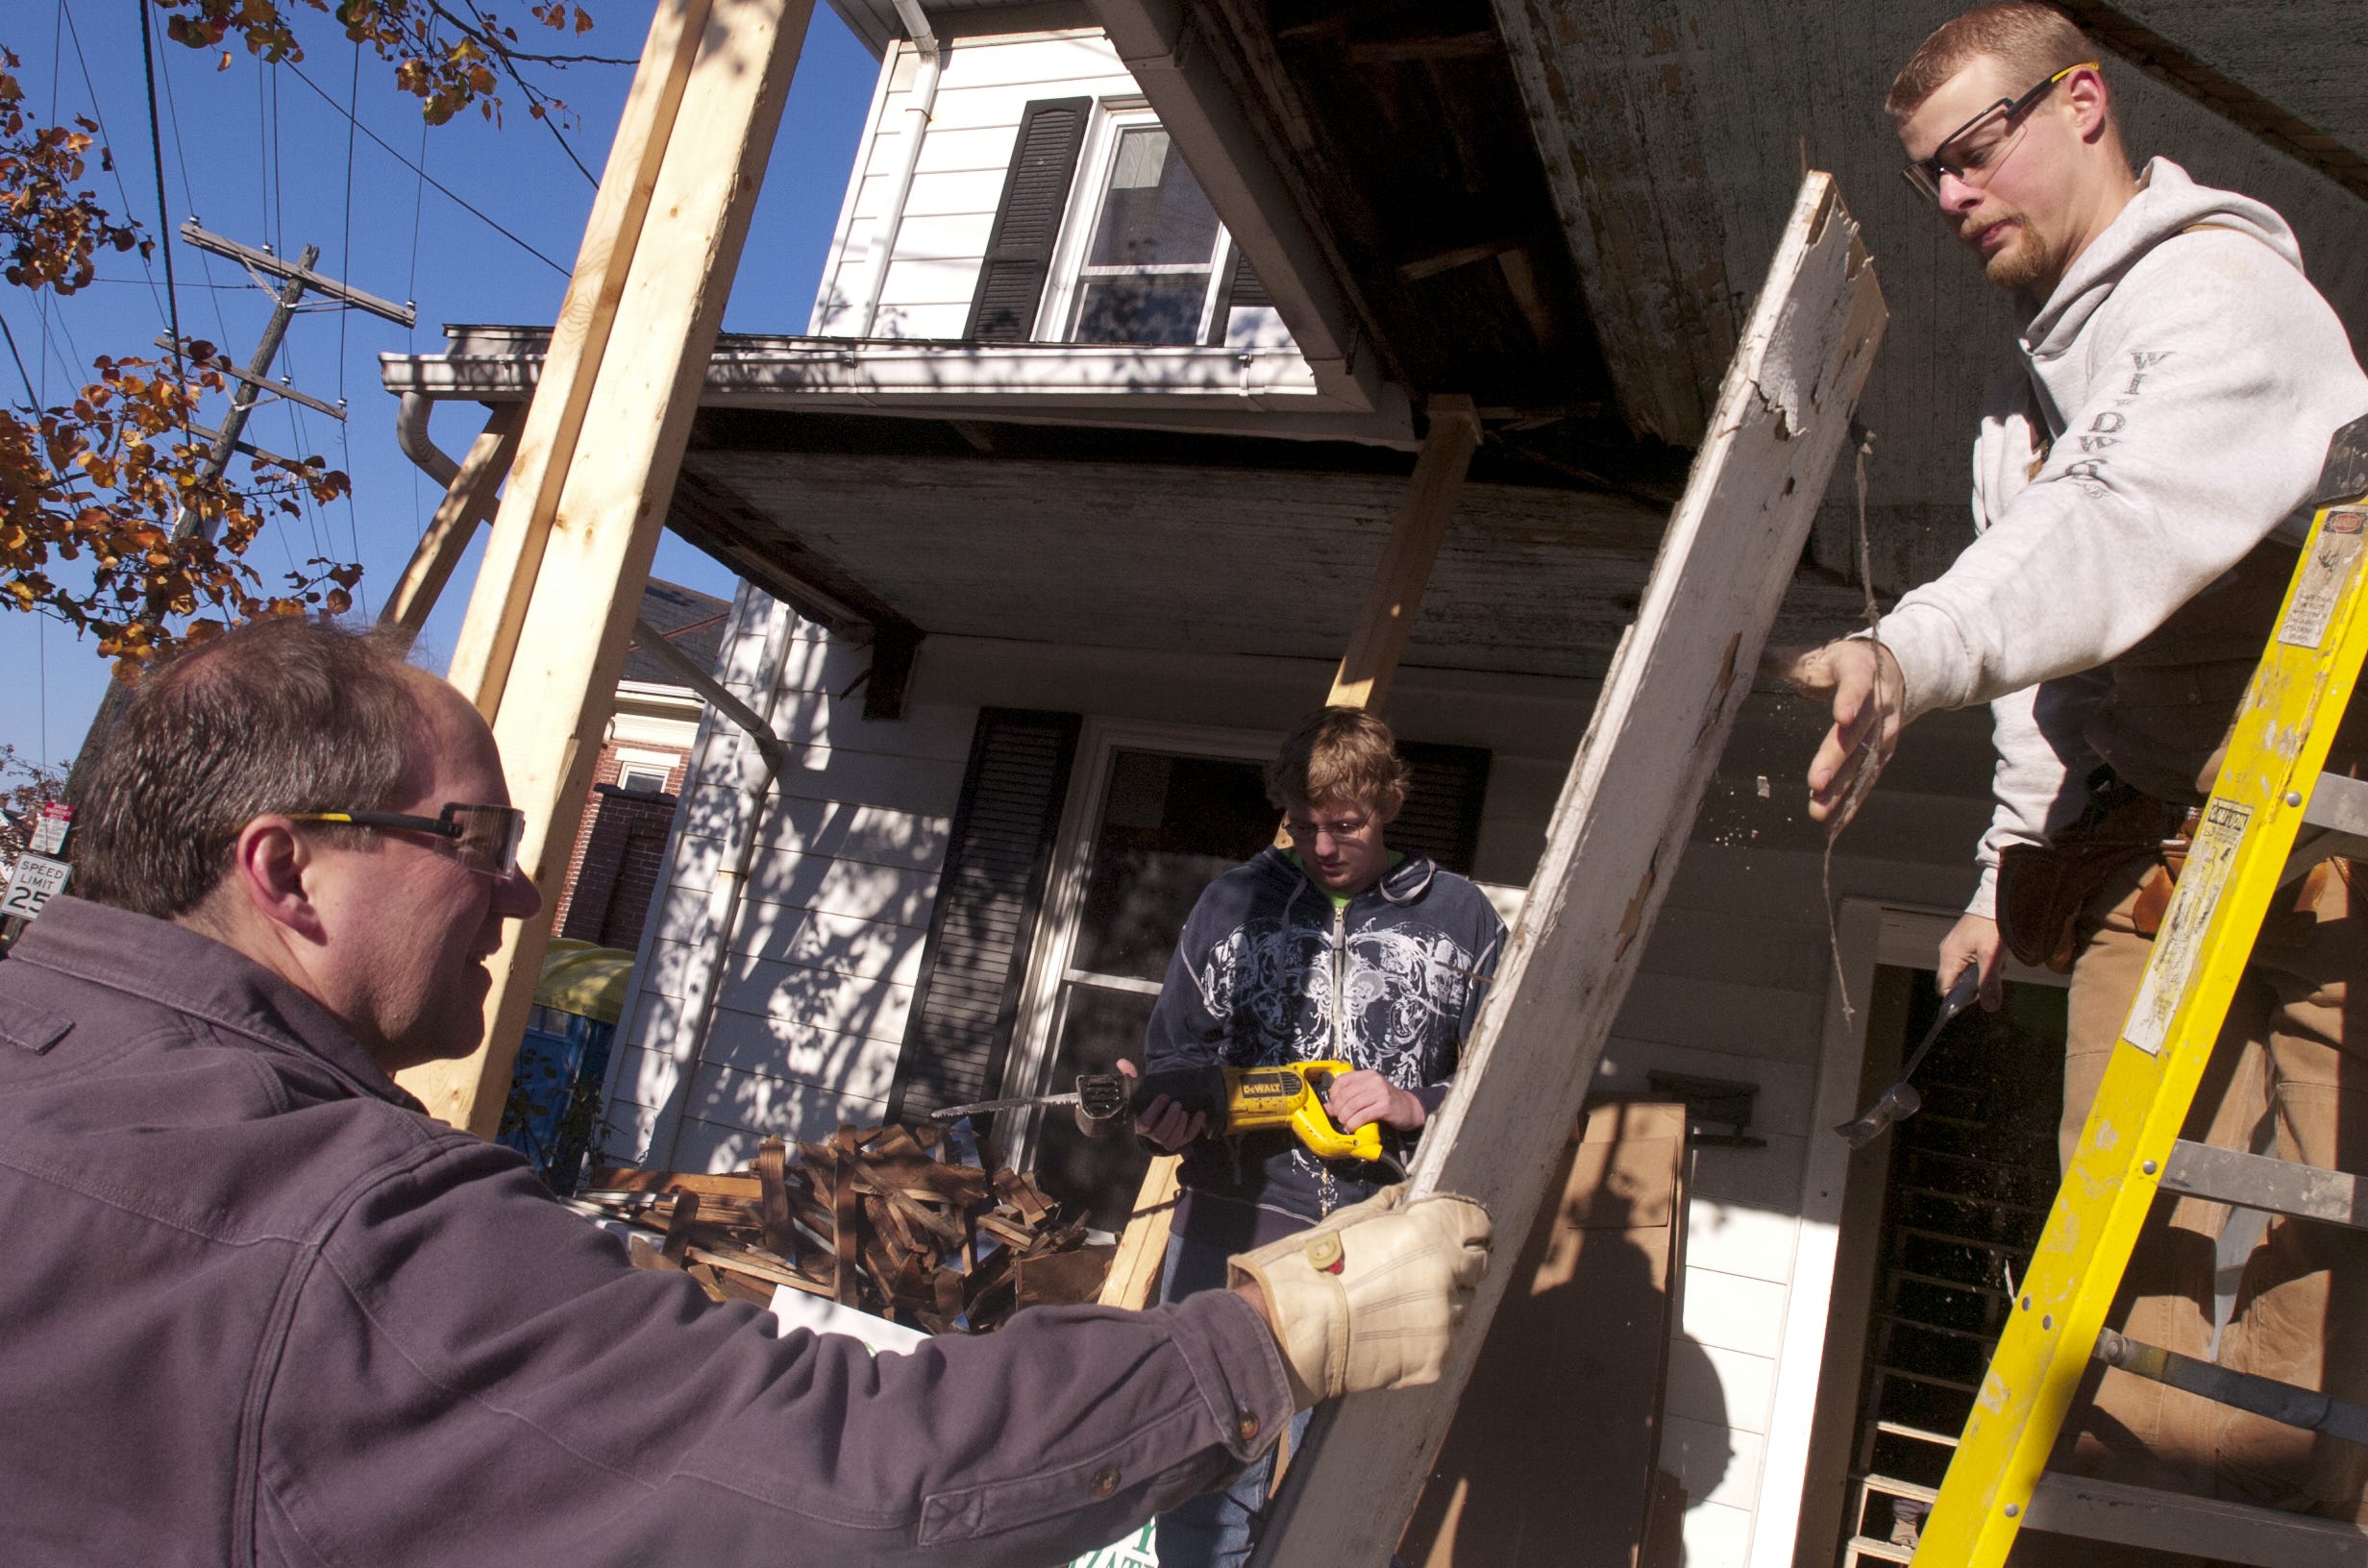 Red Lion high school drafting teacher John Royer, right, hands a piece of wood over to Superintendent Scott Deisley, as the duo joined students in working on a Habitat for Humanity home in 2011.